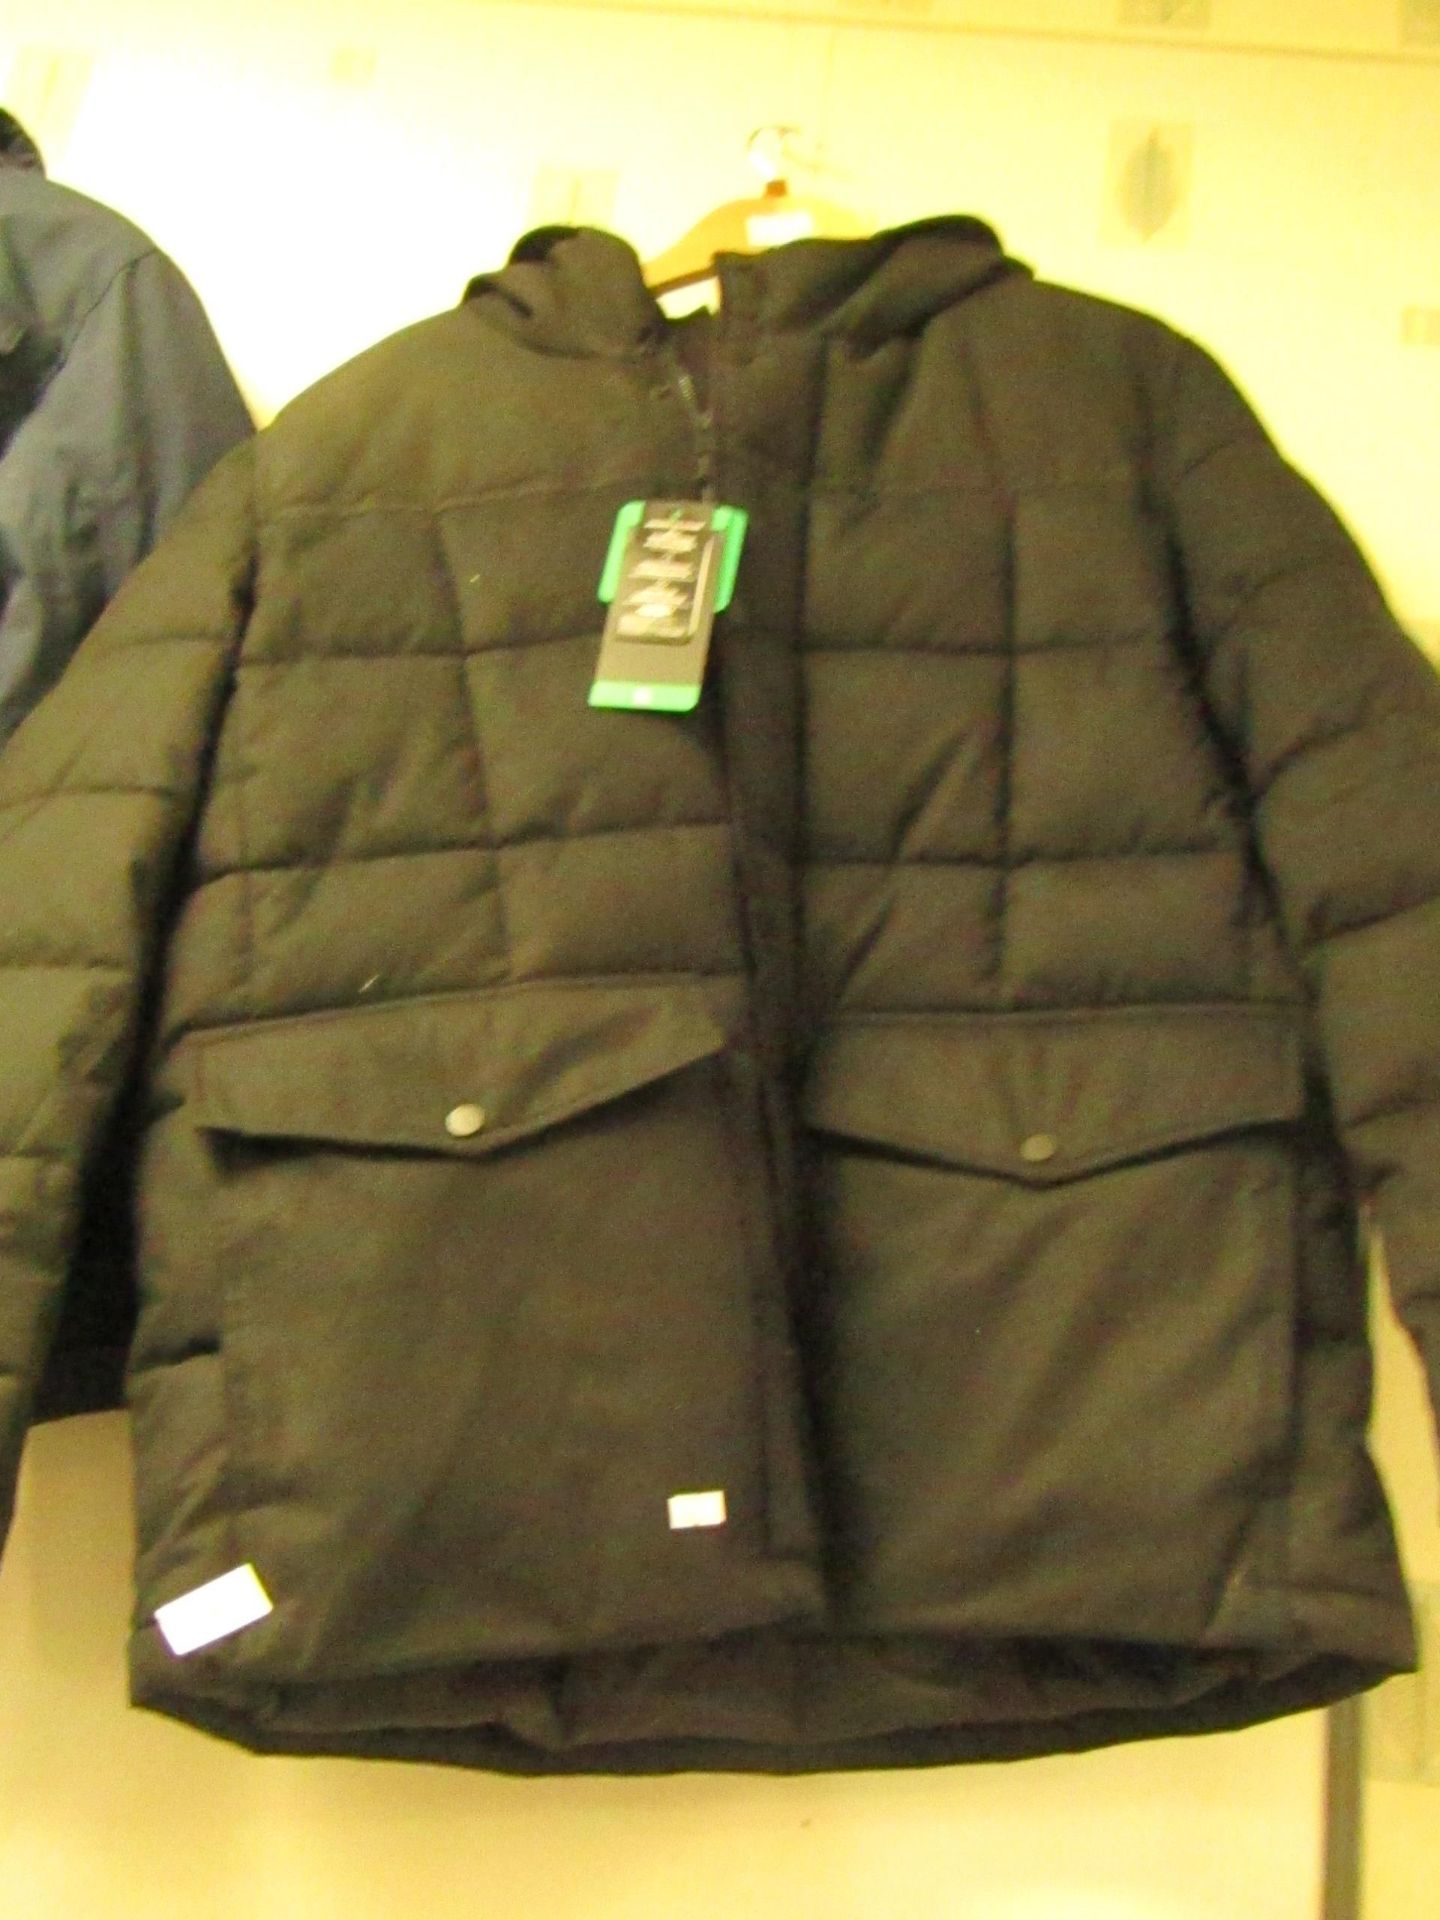 1 x Andrew Marc Mens Black Padded Jacket size XL new with tag